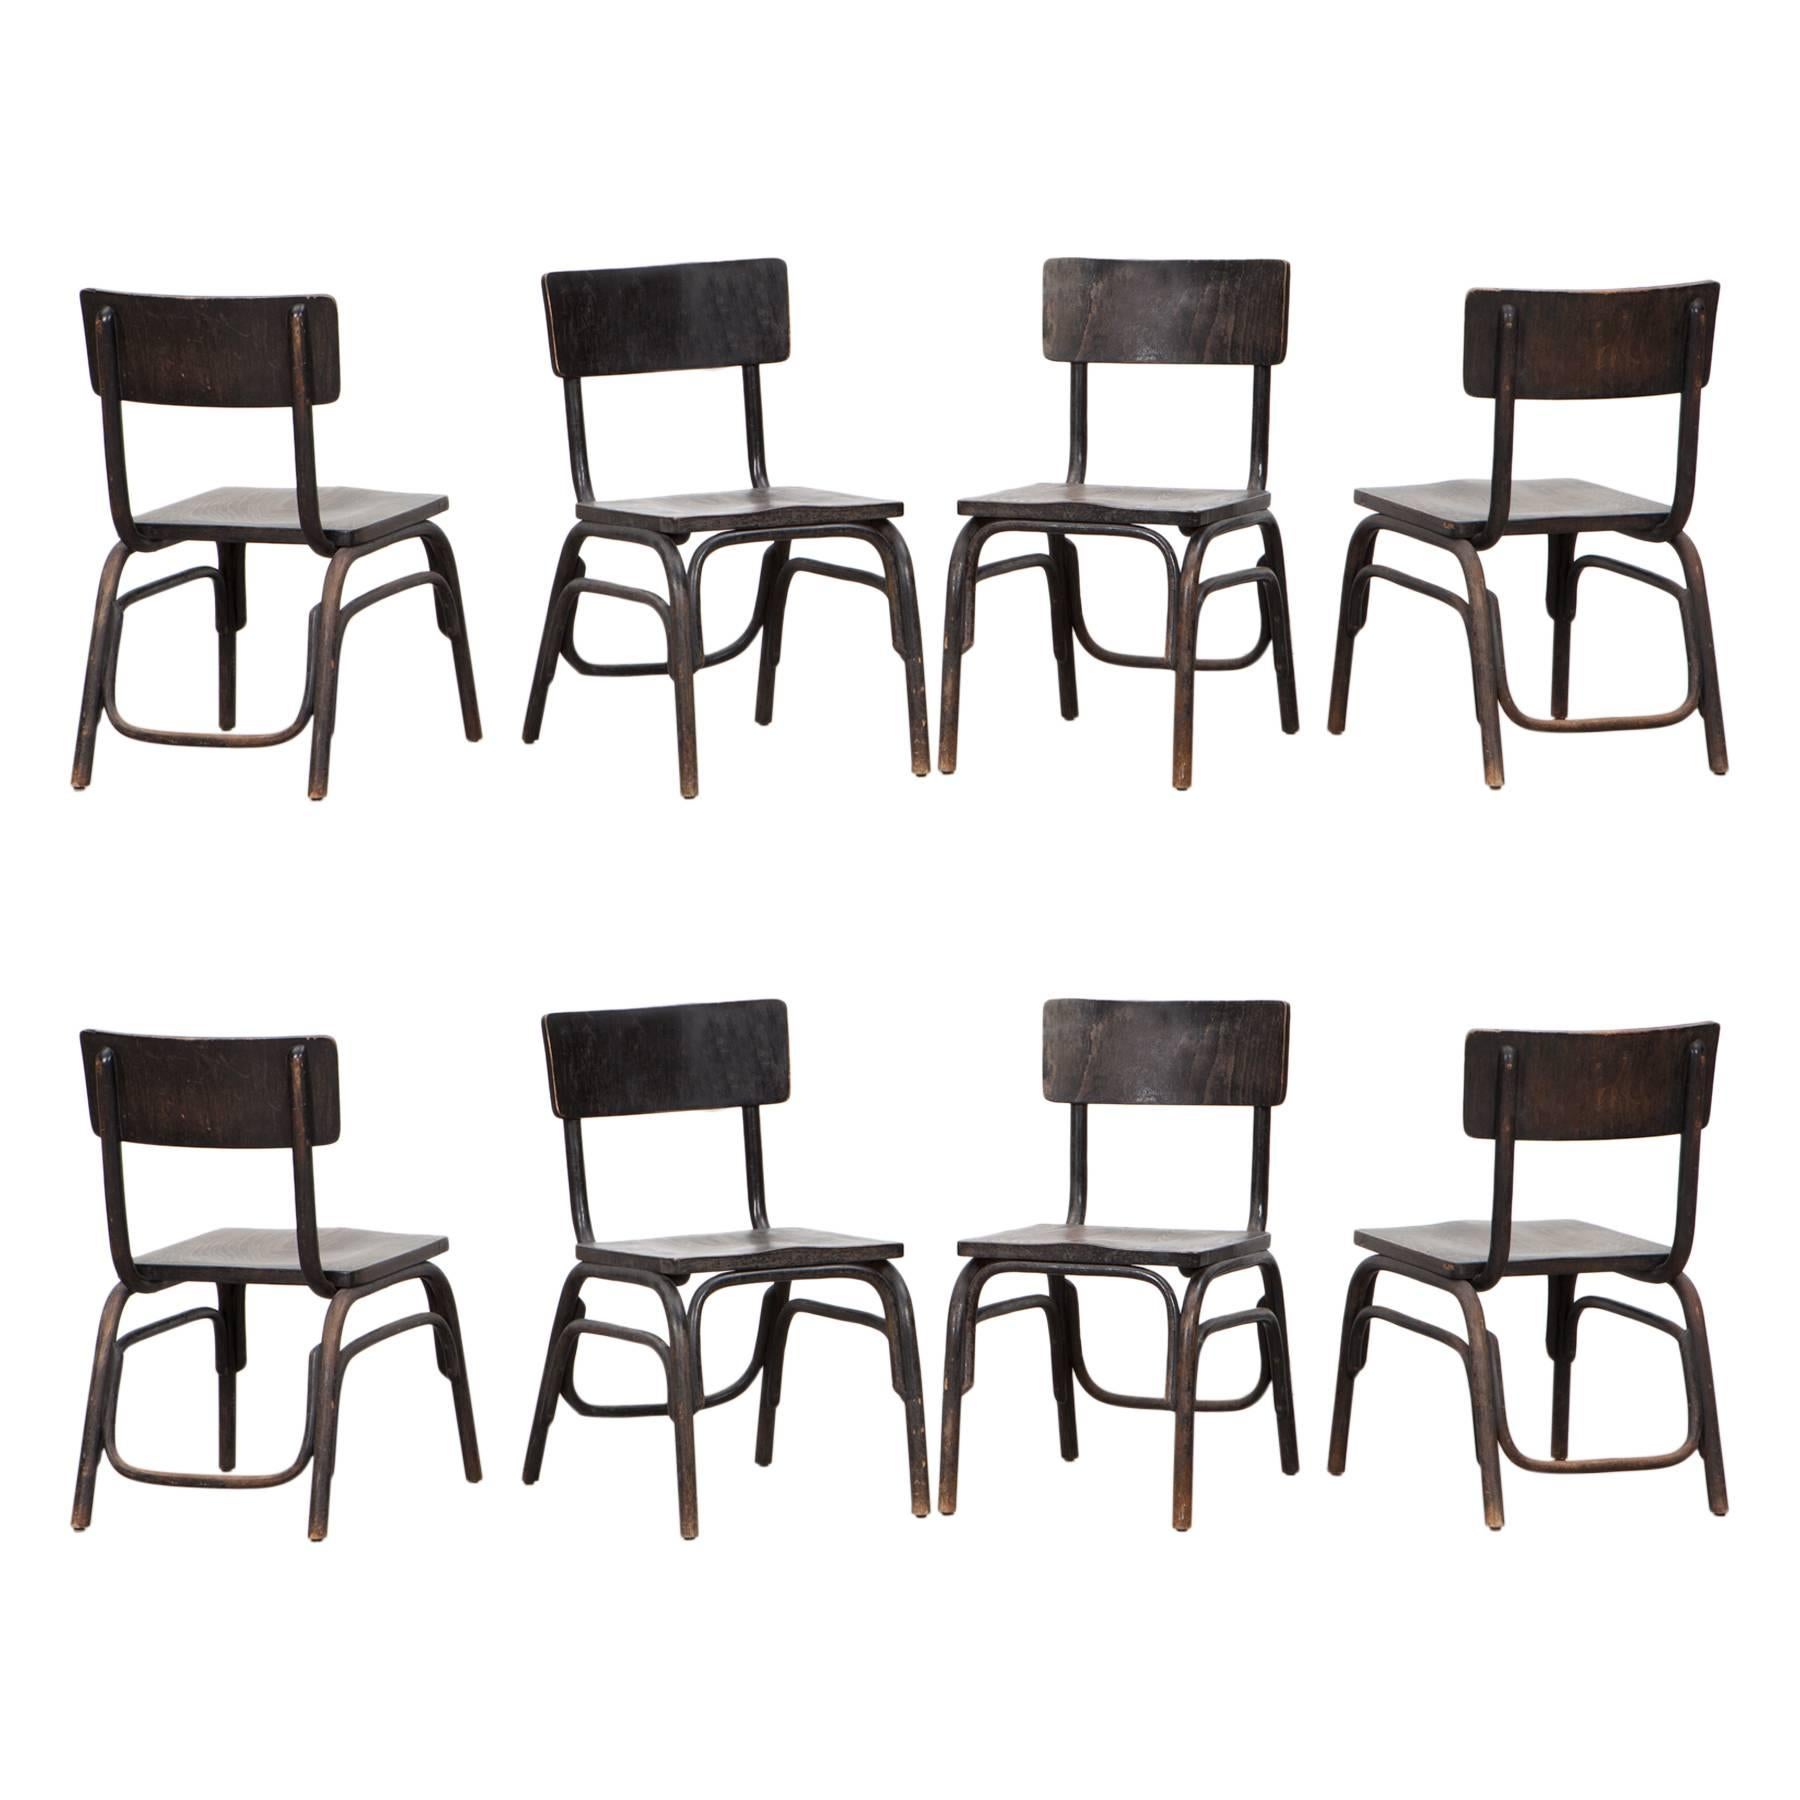 1920s black beech bentwood Easy Chairs by Ferdinand Kramer (8) For Sale